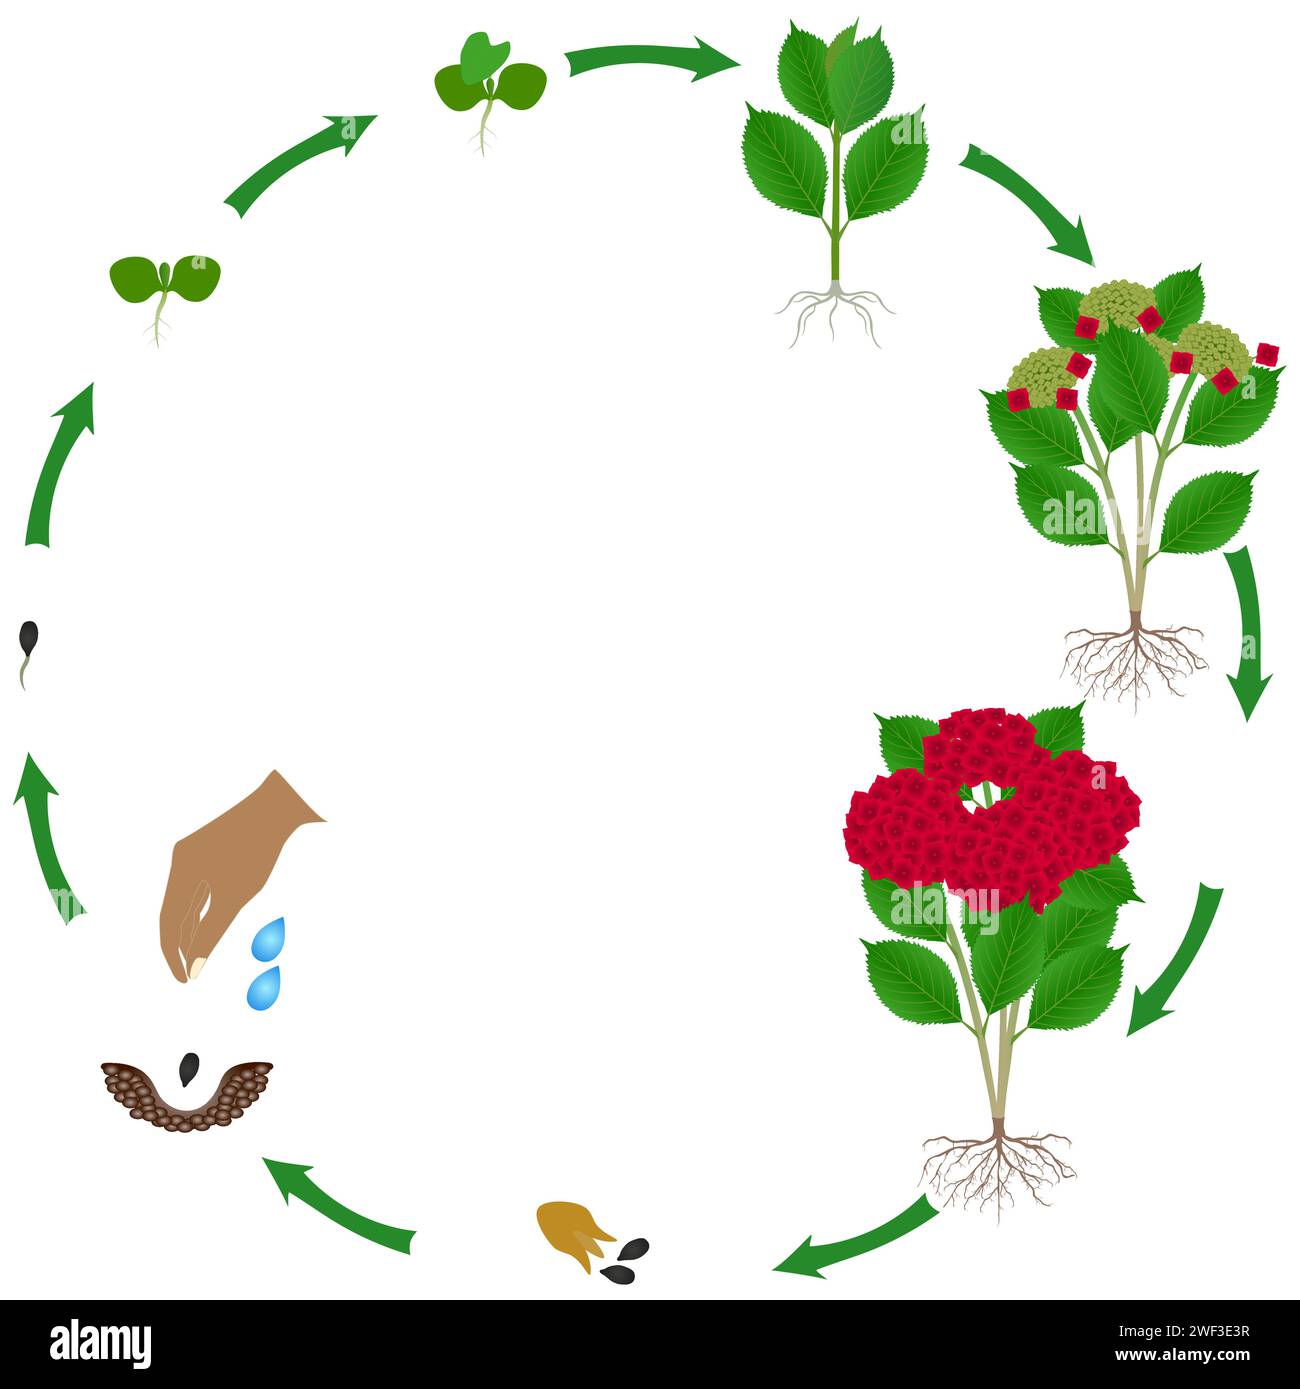 Life cycle of red hydrangea plant on a white background. Stock Vector